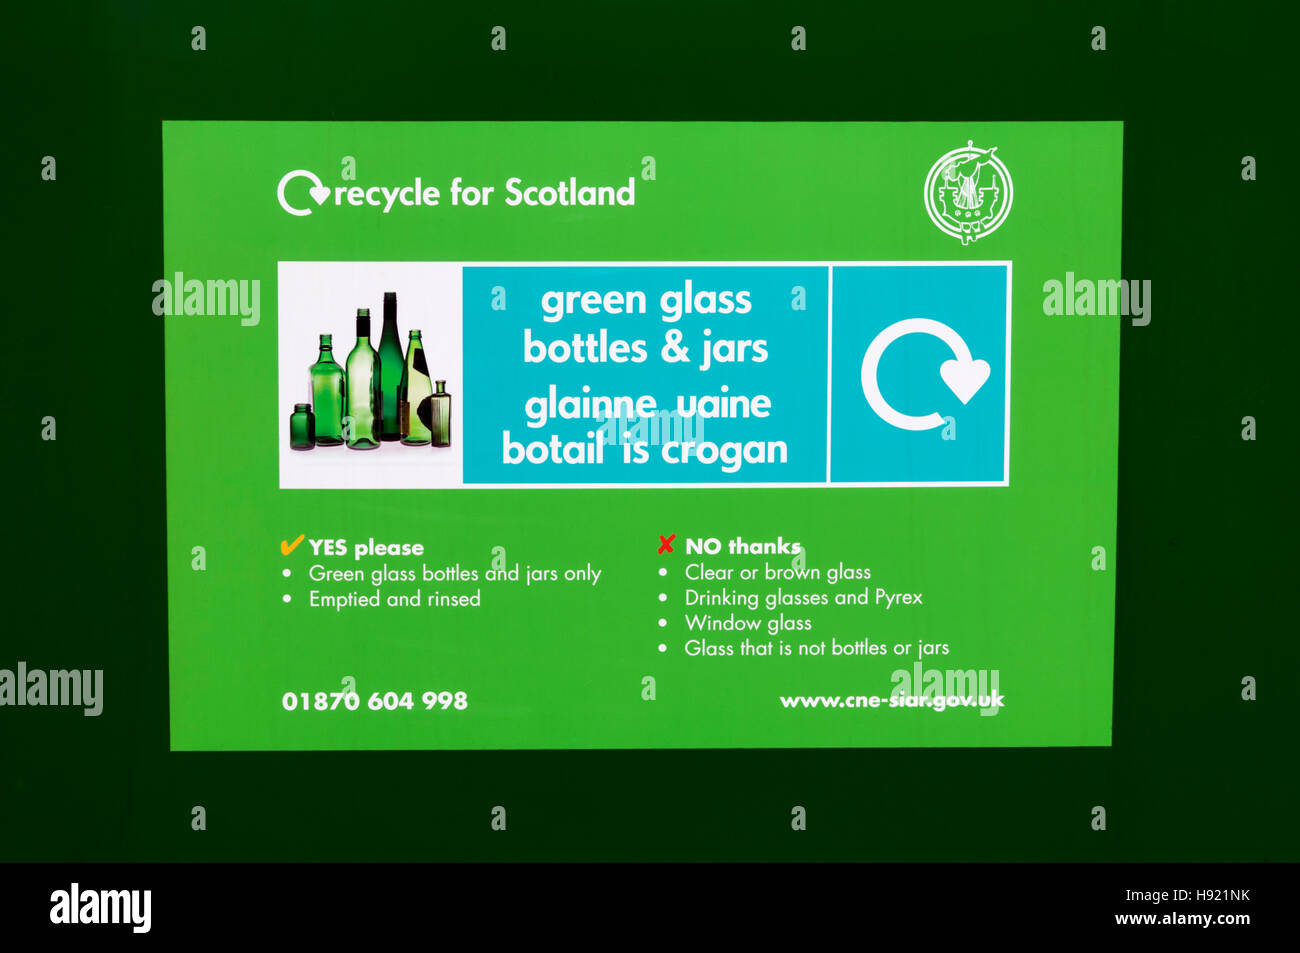 Bilingual Recycle for Scotland sign in English and Gaelic on the side of a recycling bin in the Outer Hebrides. Stock Photo